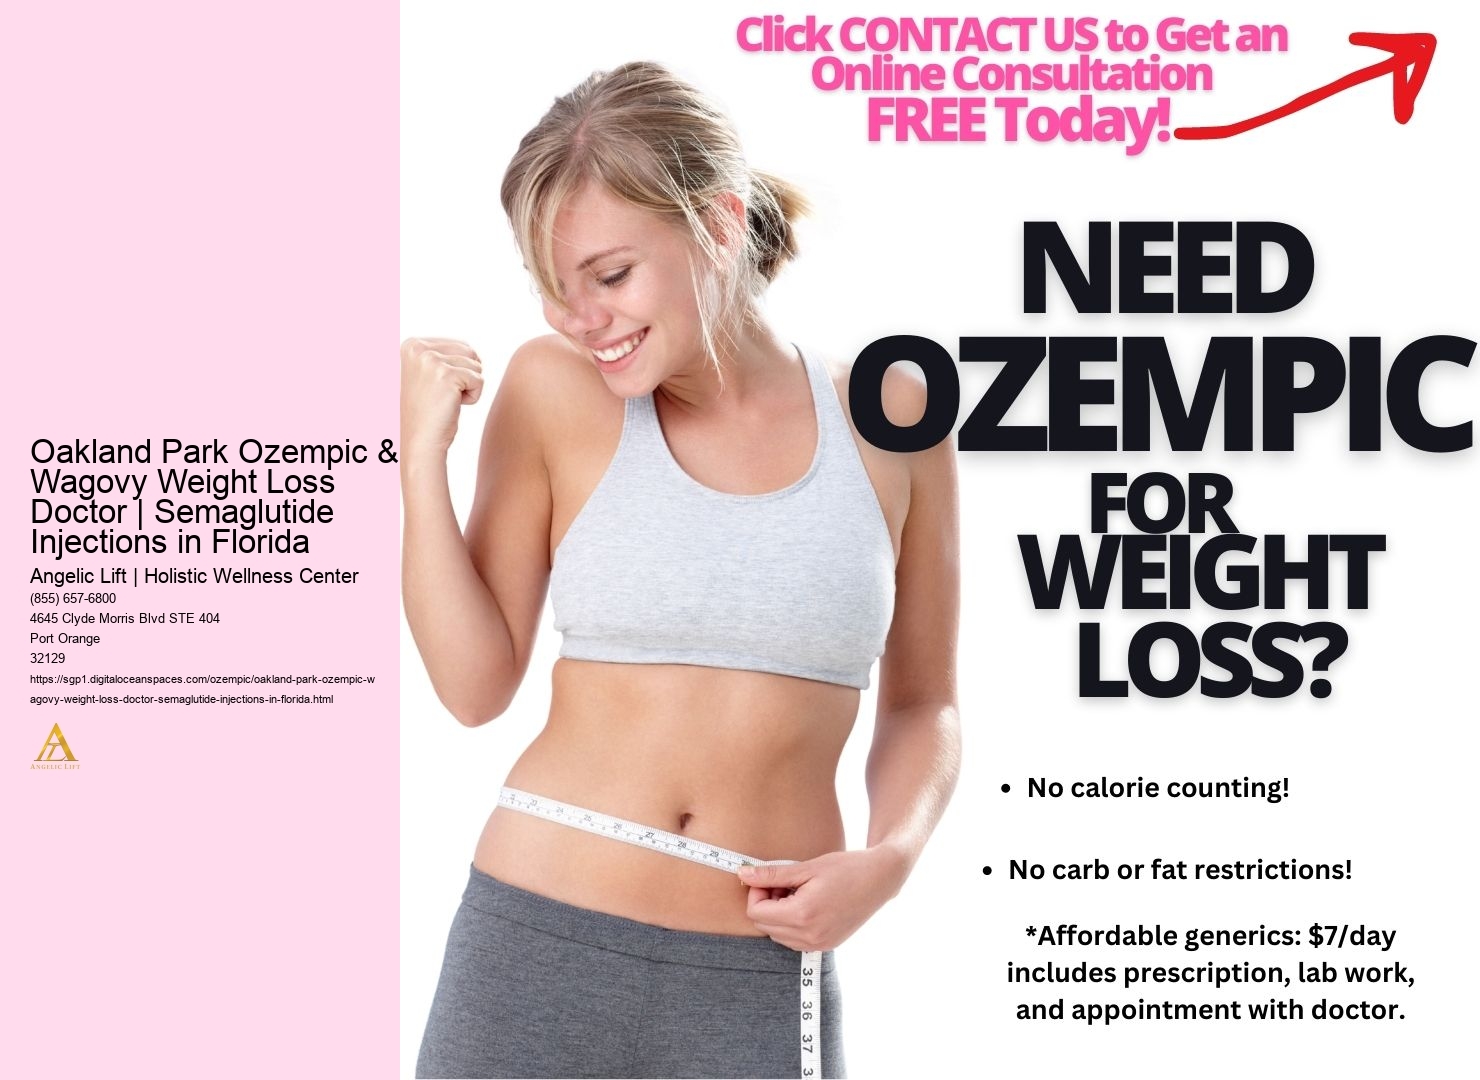 Oakland Park Ozempic & Wagovy Weight Loss Doctor | Semaglutide Injections in Florida